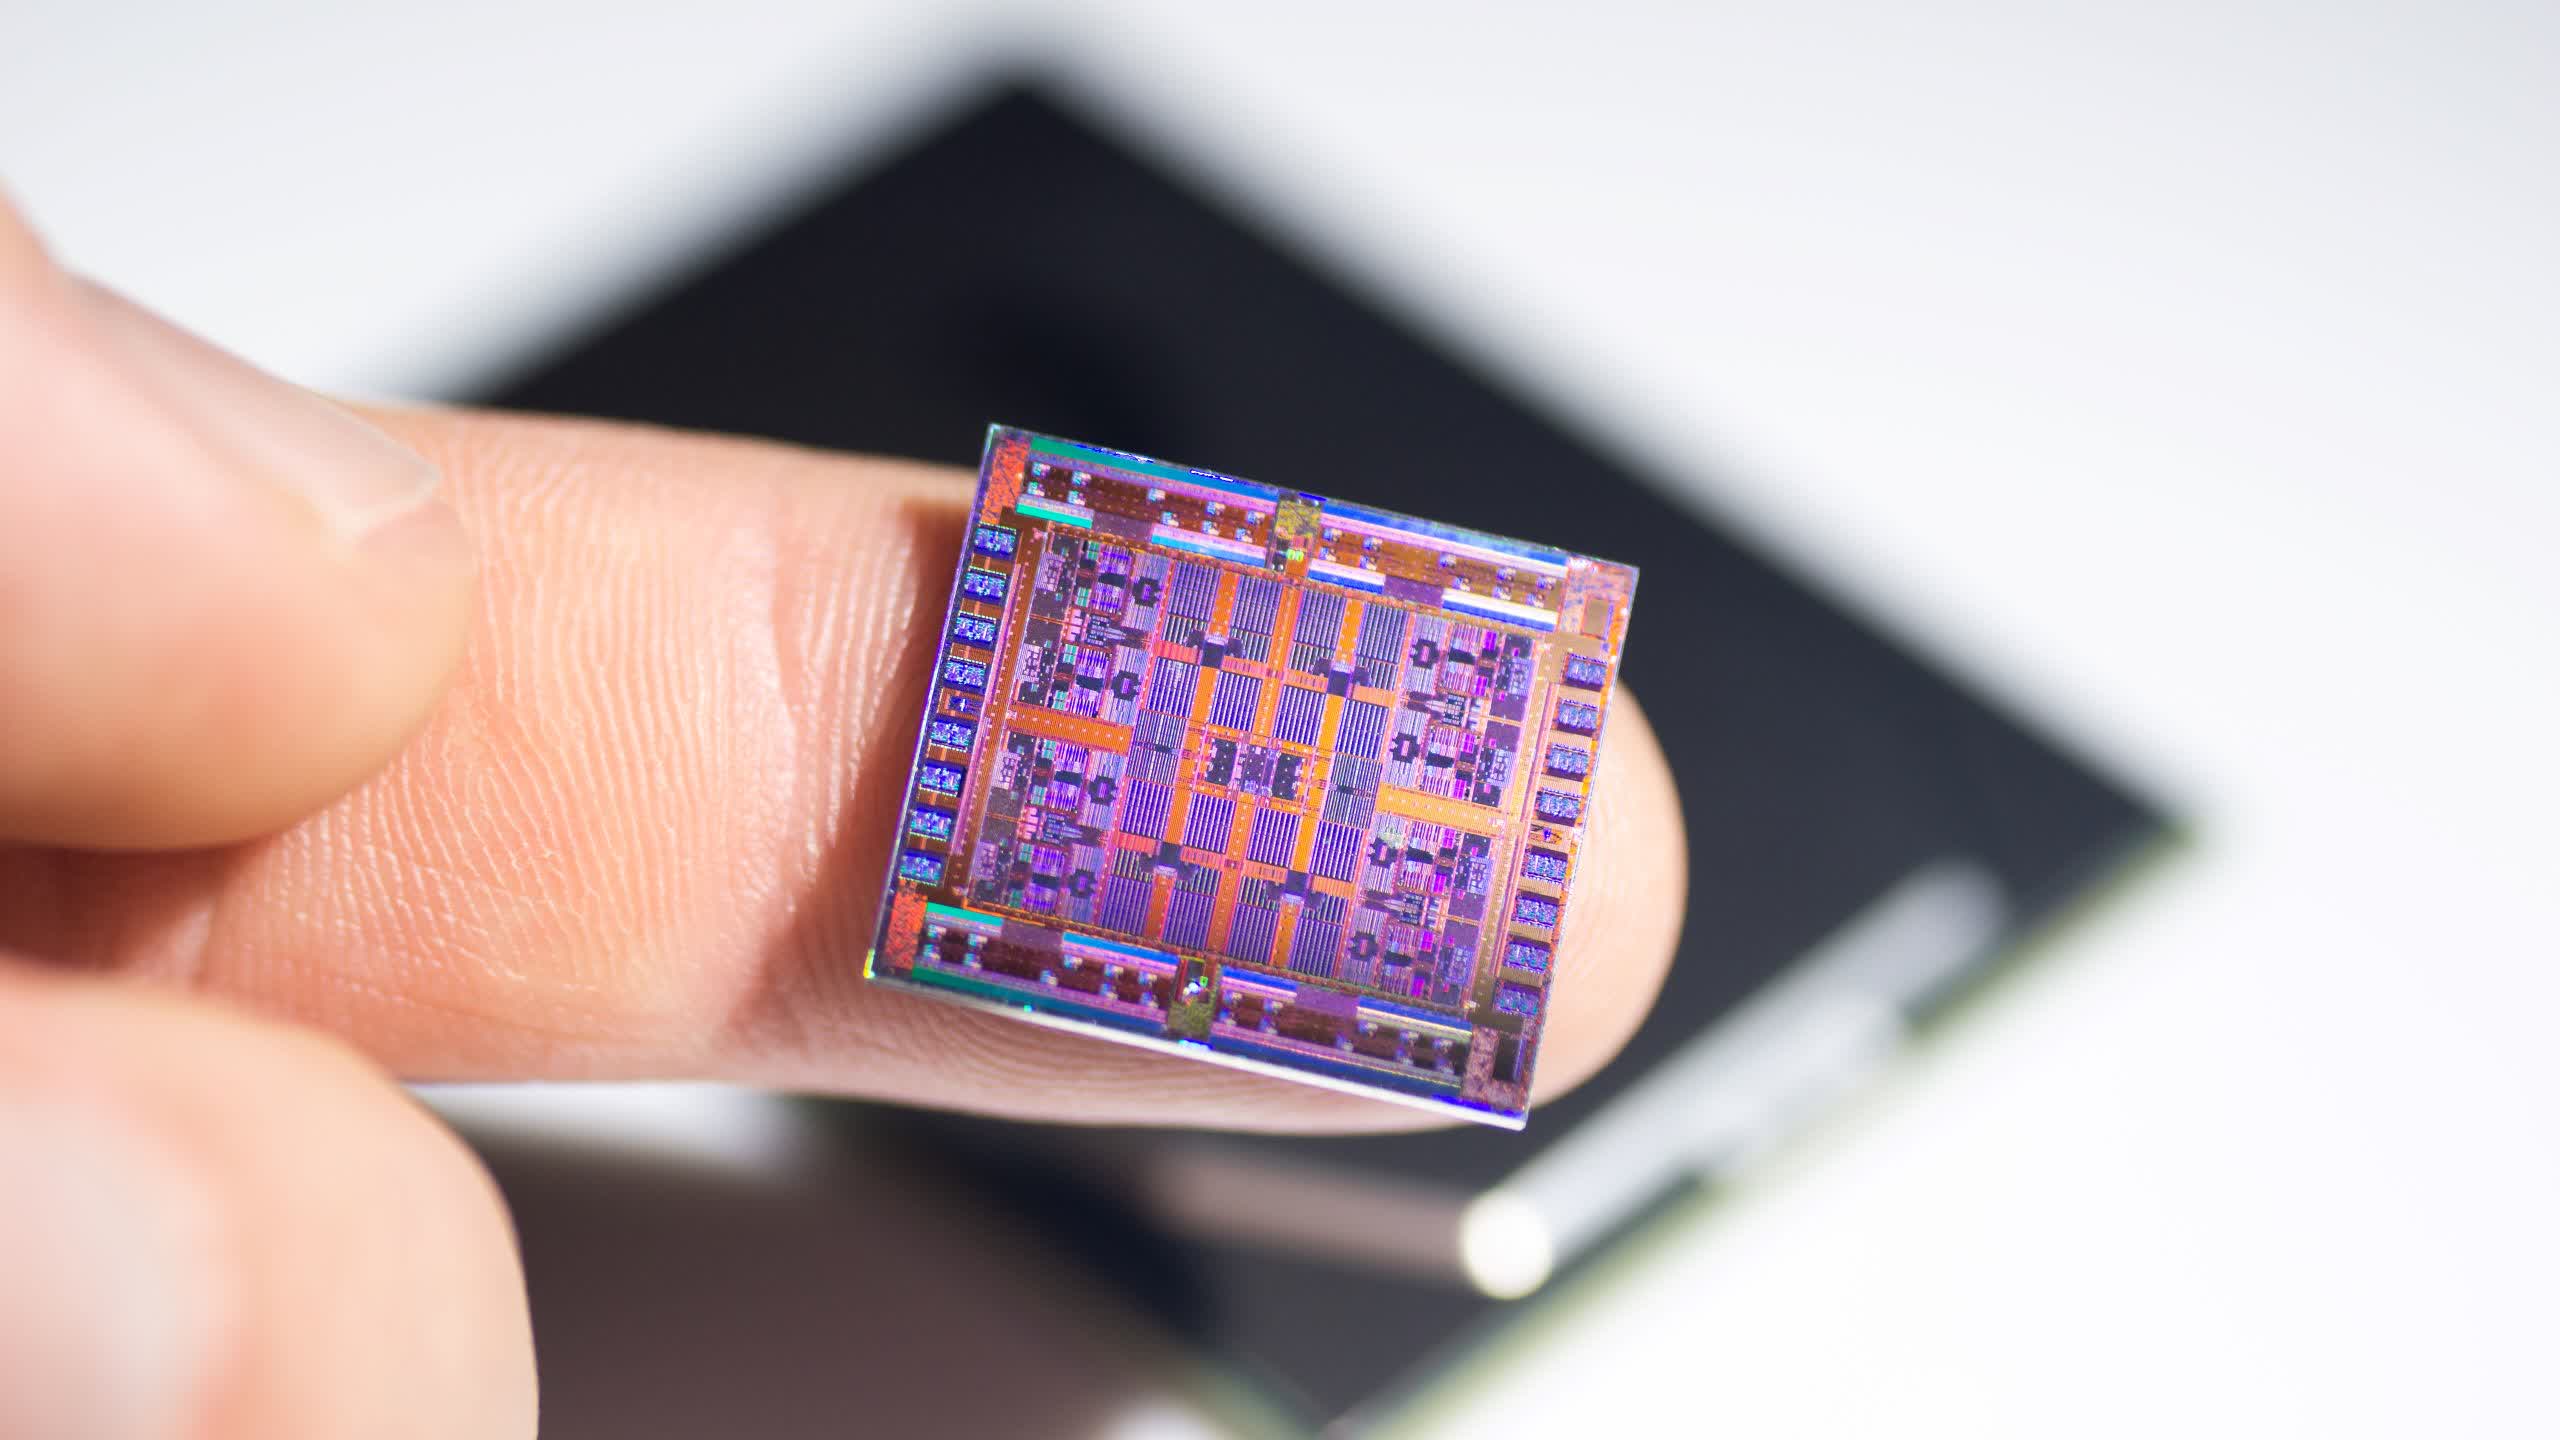 TSMC says 2nm chips will enter production in 2025